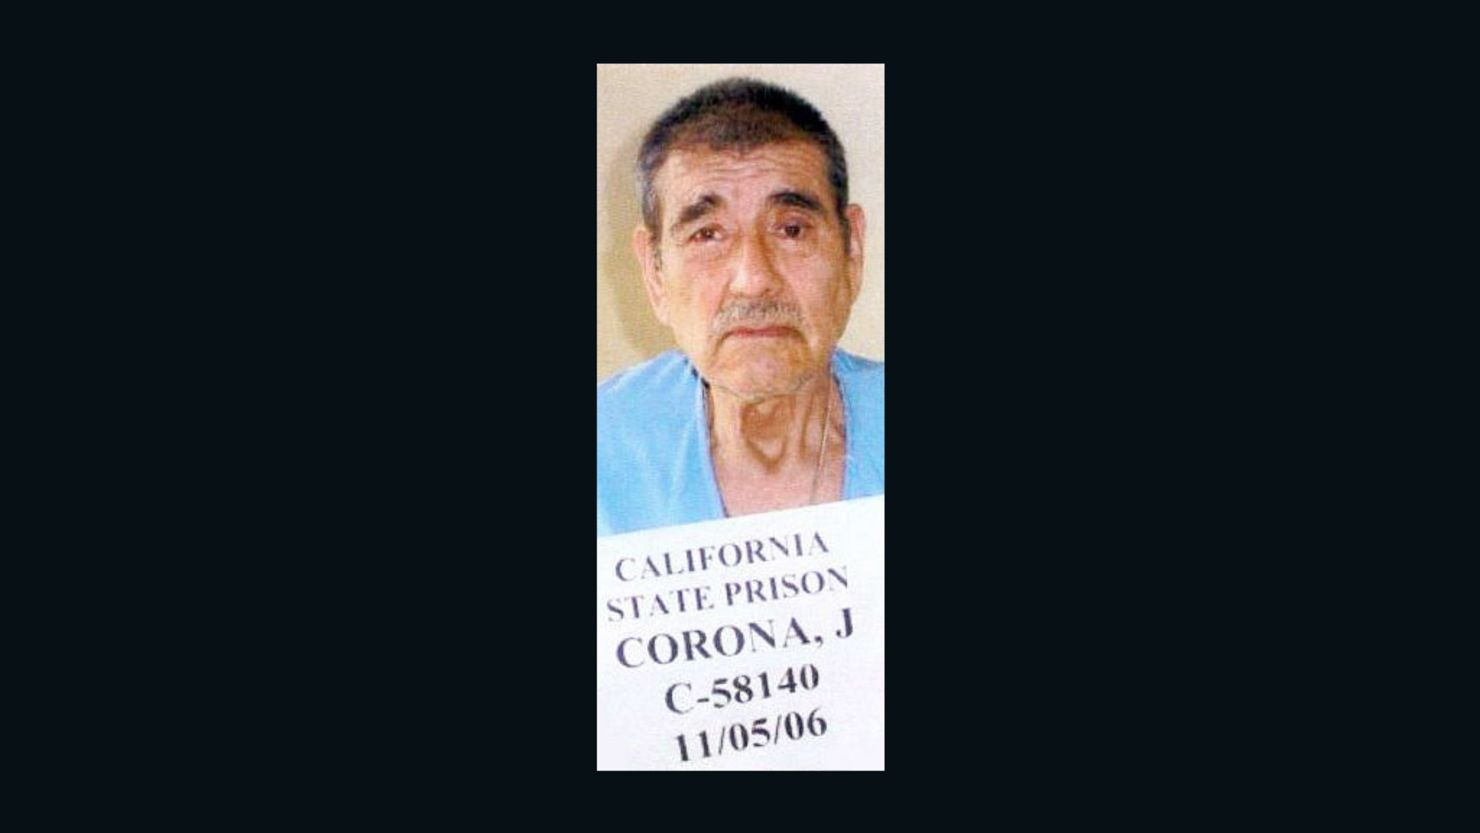 Juan Corona, now 77, was convicted of killing 25 people four decades ago.